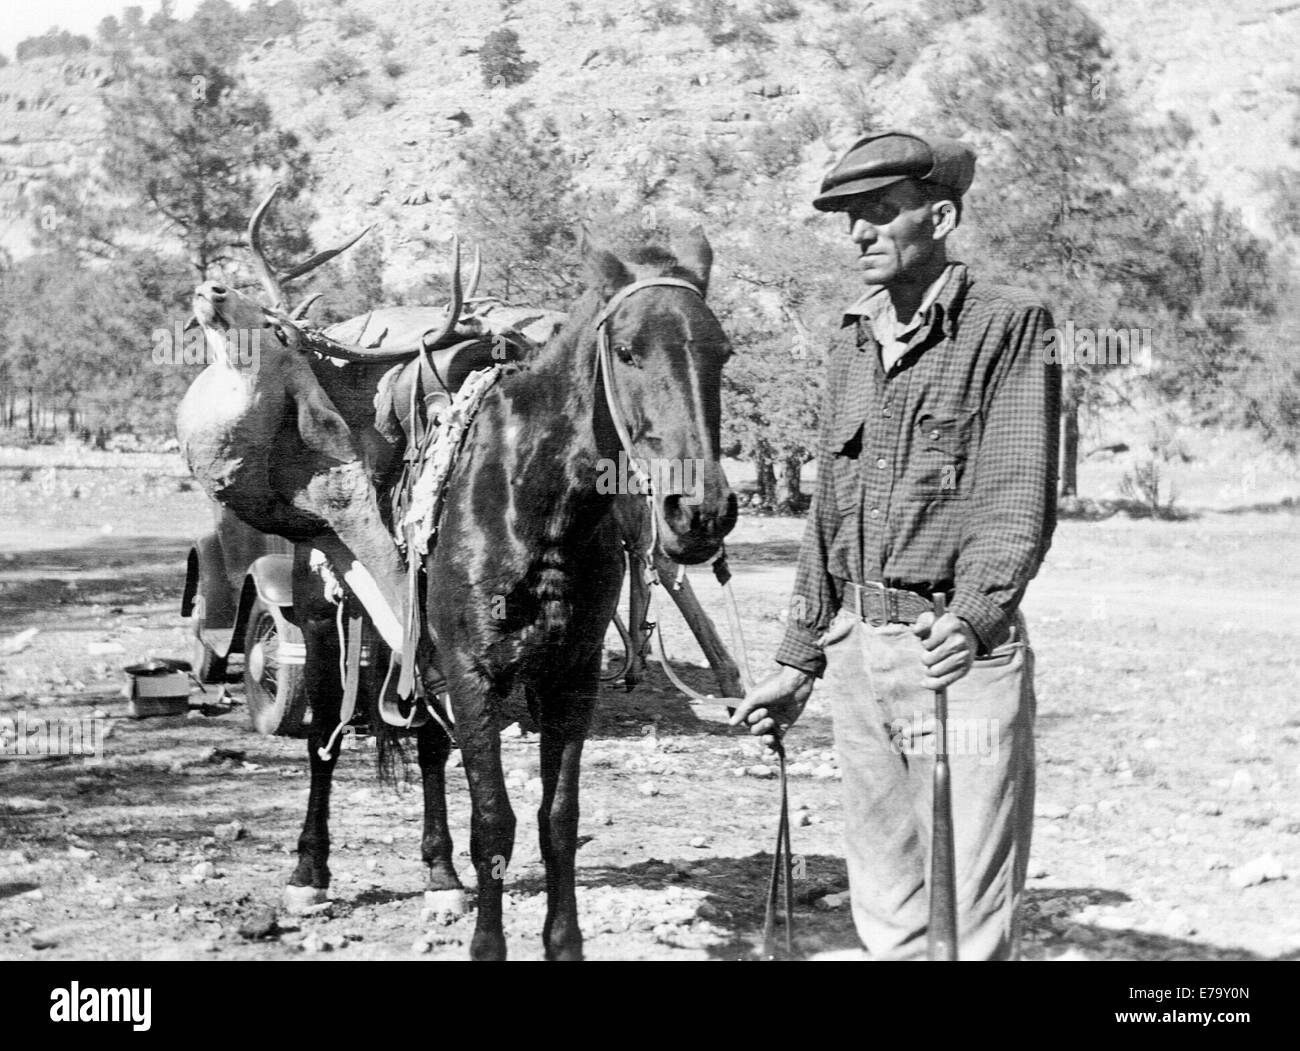 A 1950s deer hunter in the Pecos area of the Sangre de Cristo Mountains near Santa Fe, New Mexico with a pack horse Stock Photo